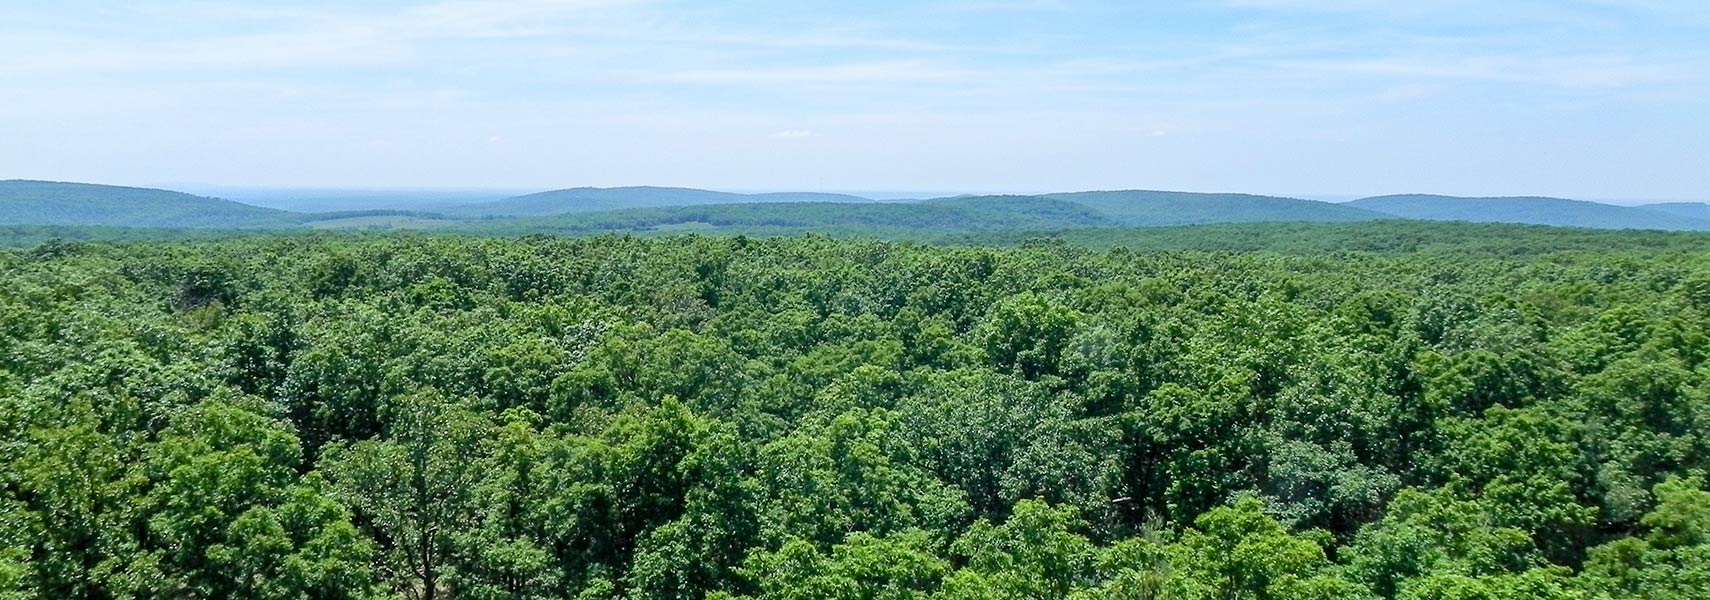 The Ozark Highlands. View from the lookout tower on Taum Sauk Mountain in Missouri.